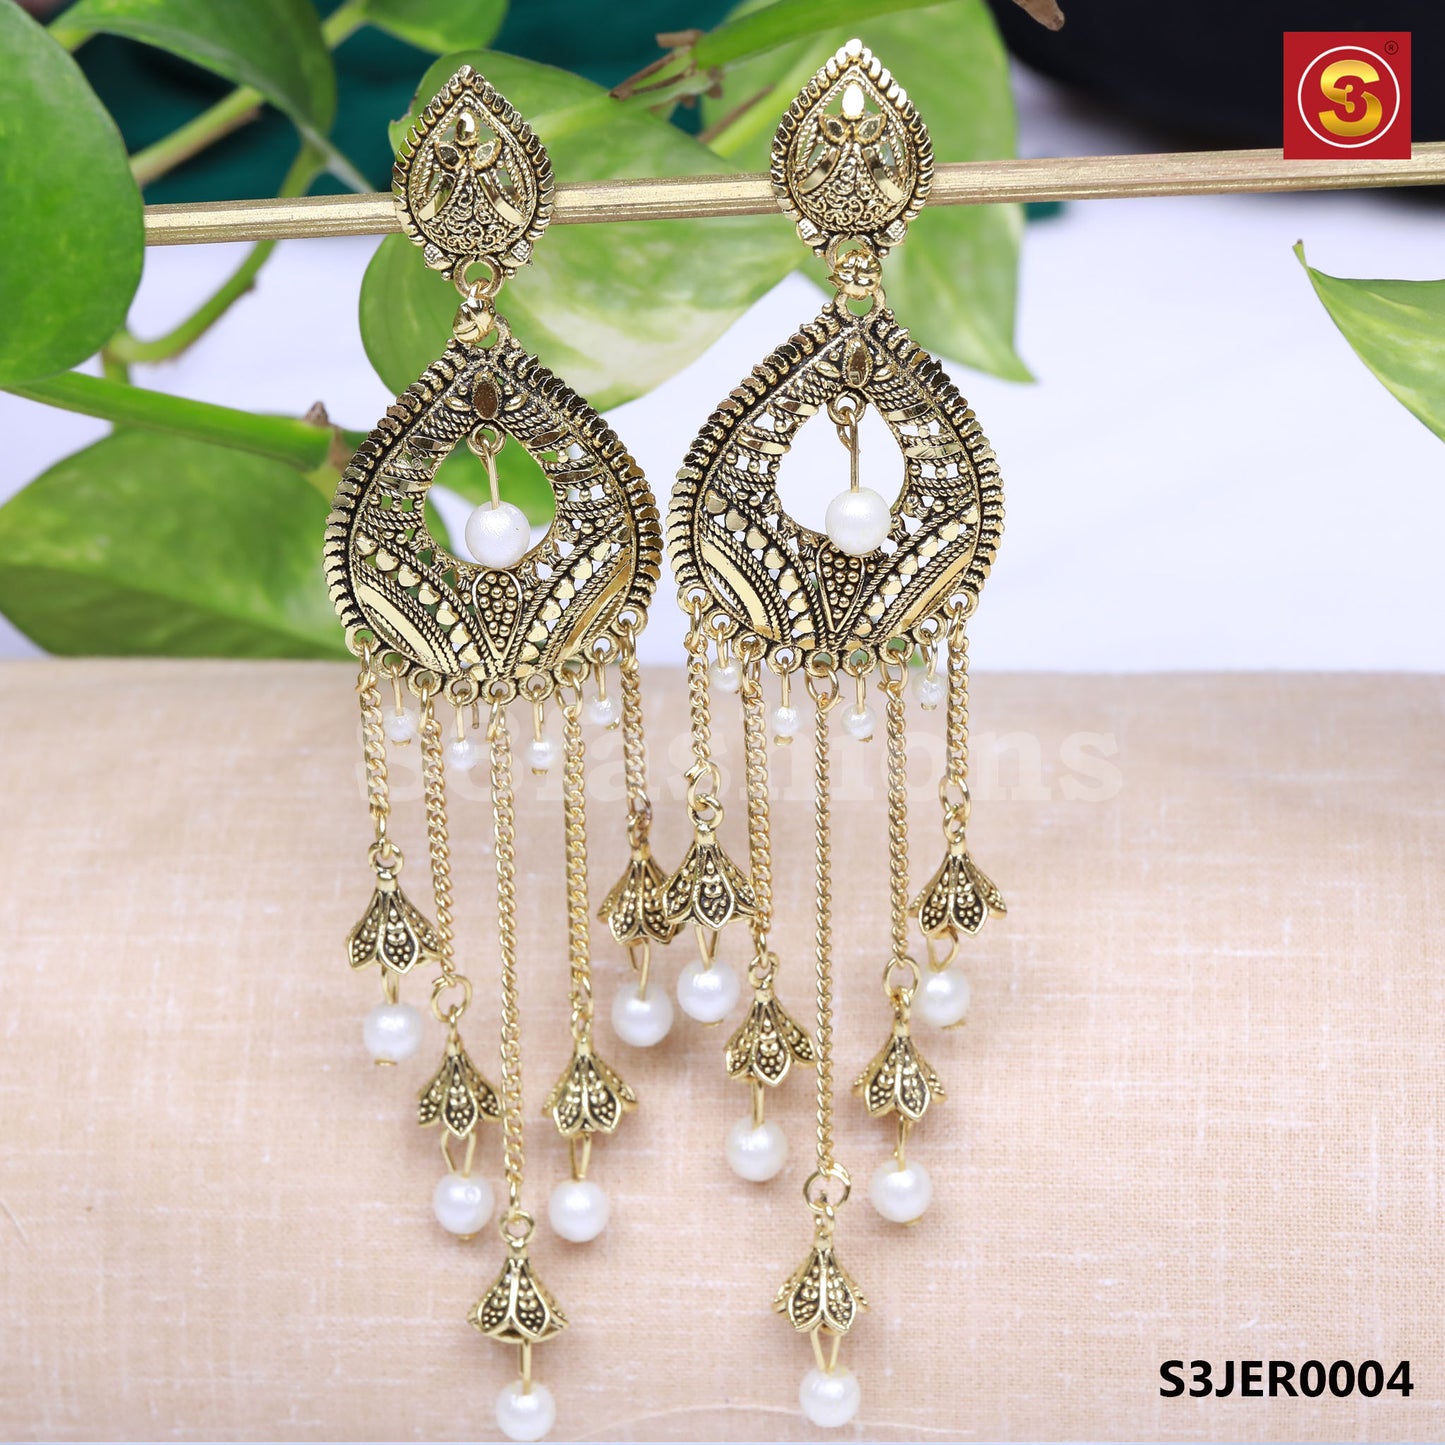 Antique Tasseled Earrings with Hanging White Pearls (S3JER0004)